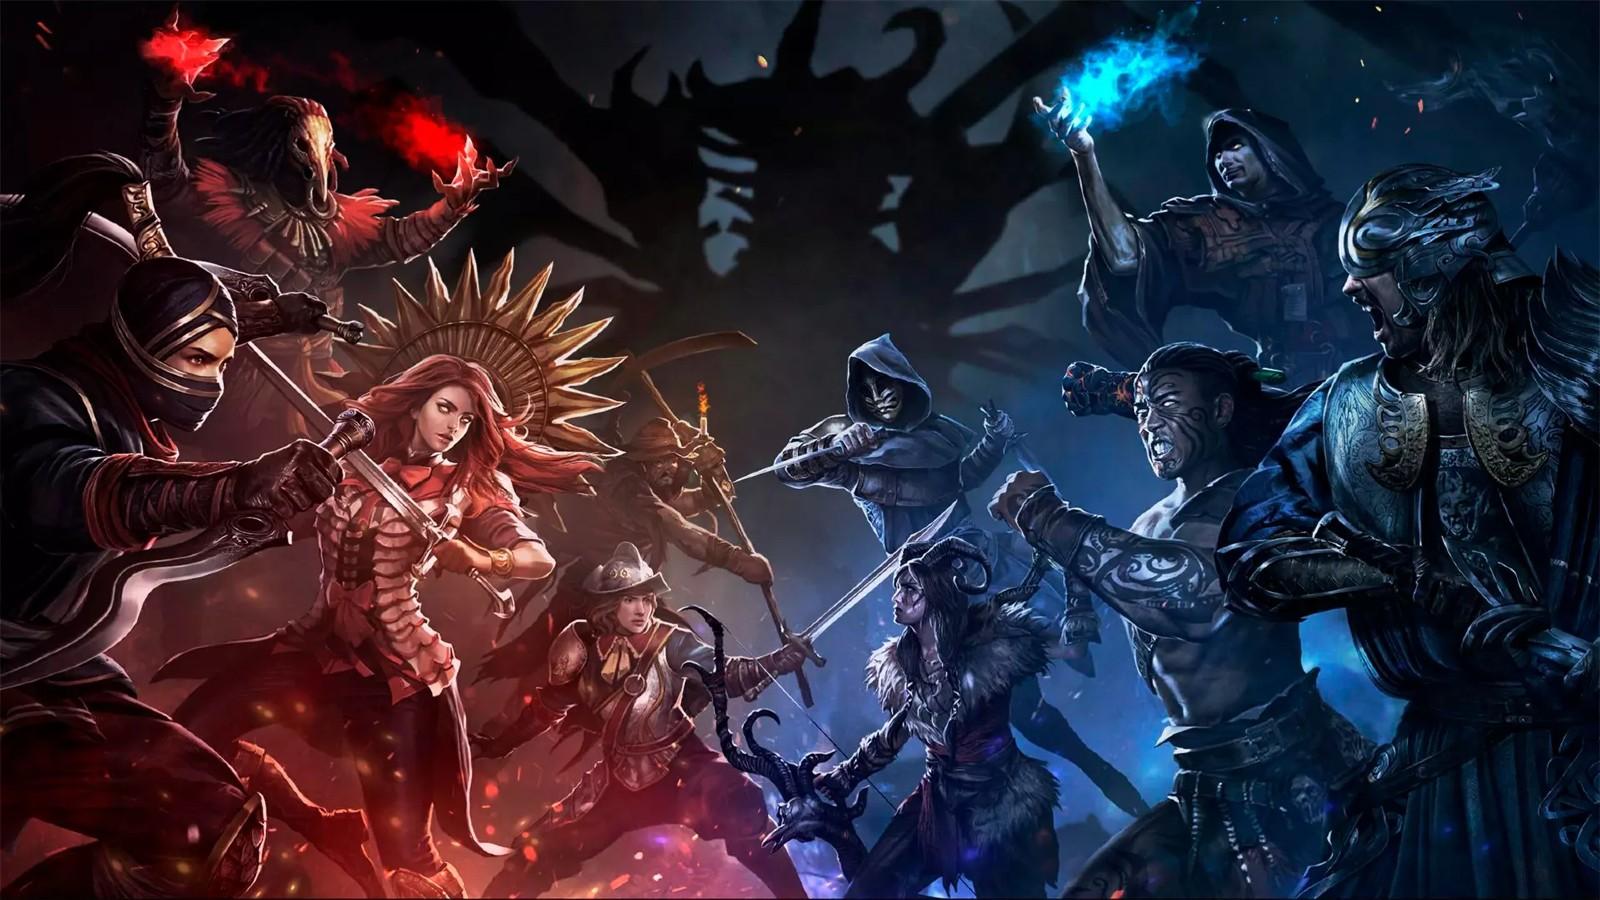 An image of Path of Exile artwork.